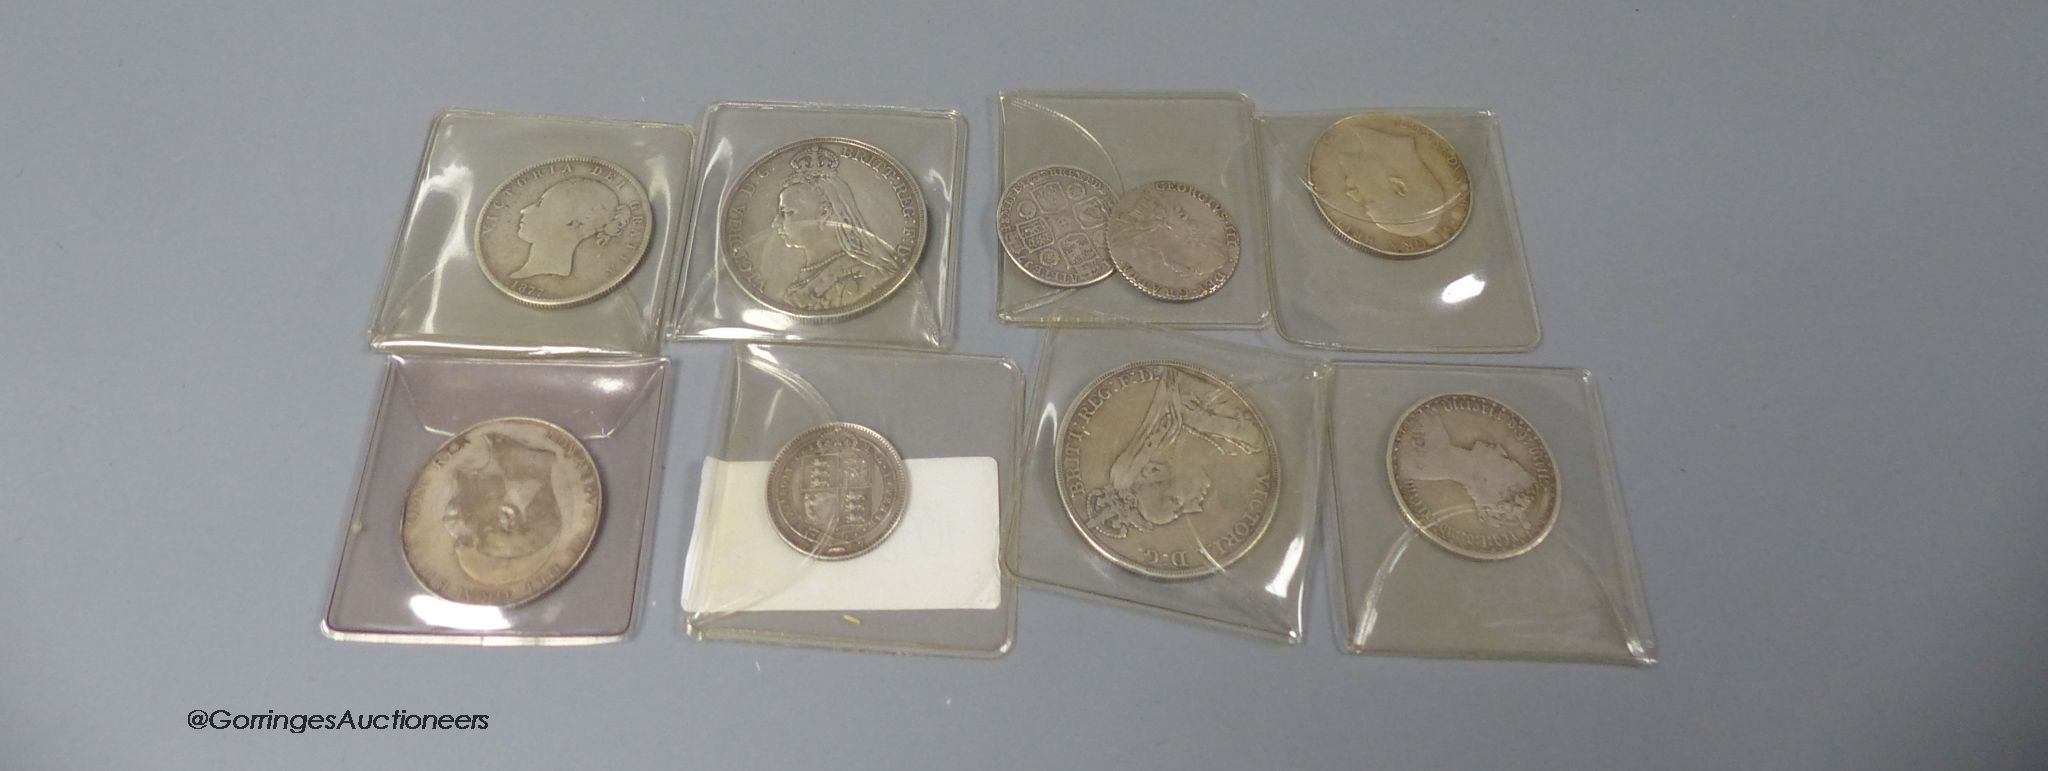 Nine various British silver coins, from 1748